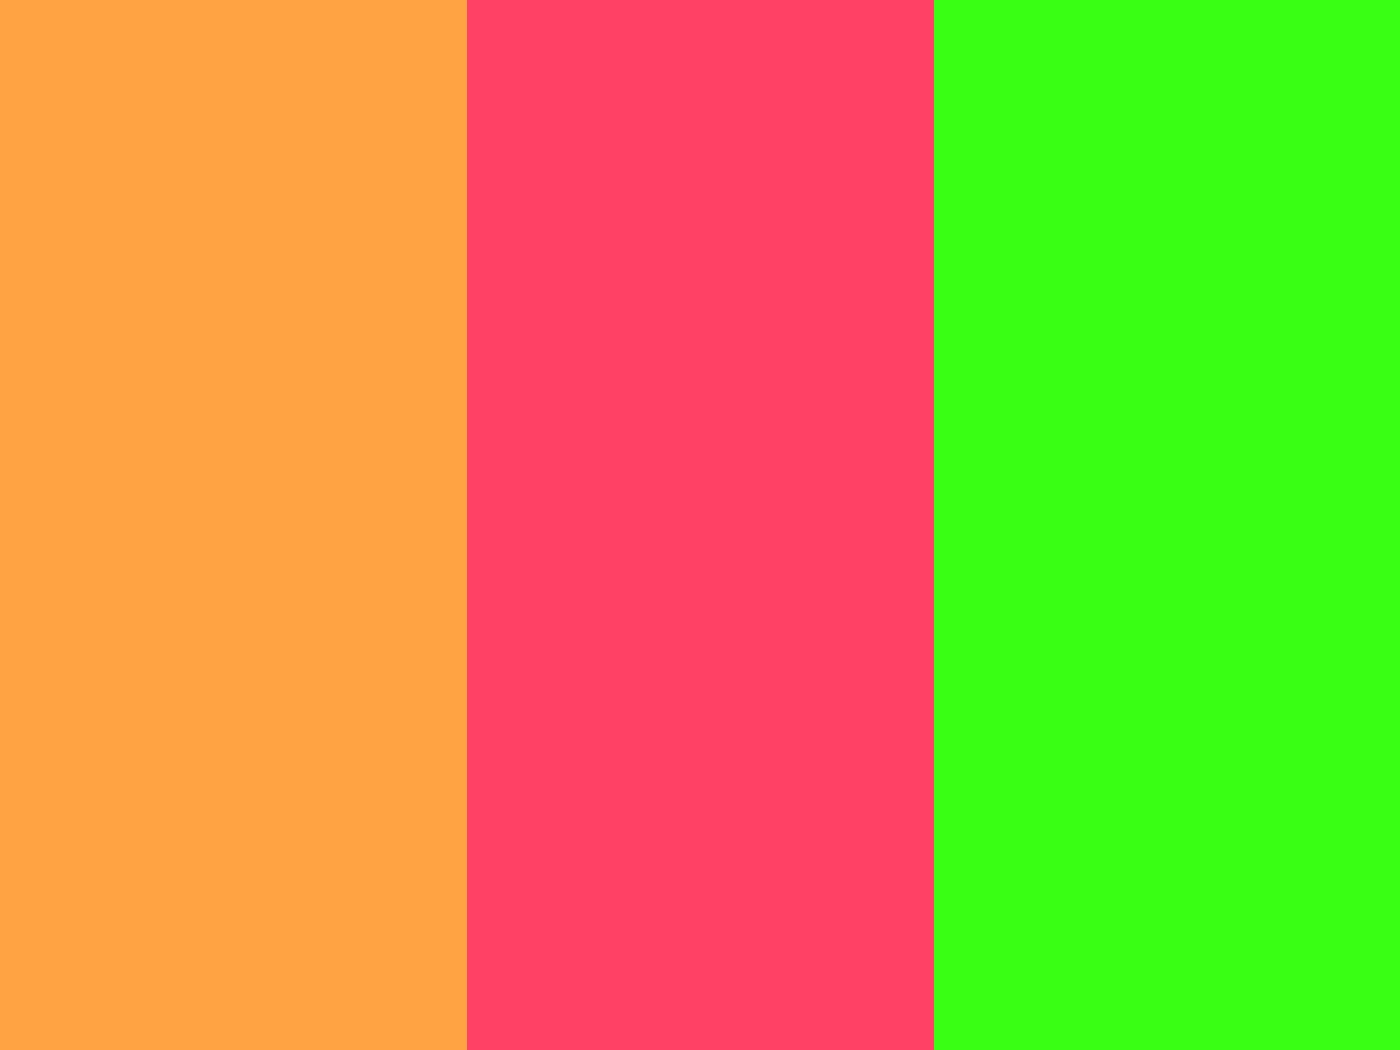 Neon Carrot Neon Fuchsia and Neon Green solid three color background